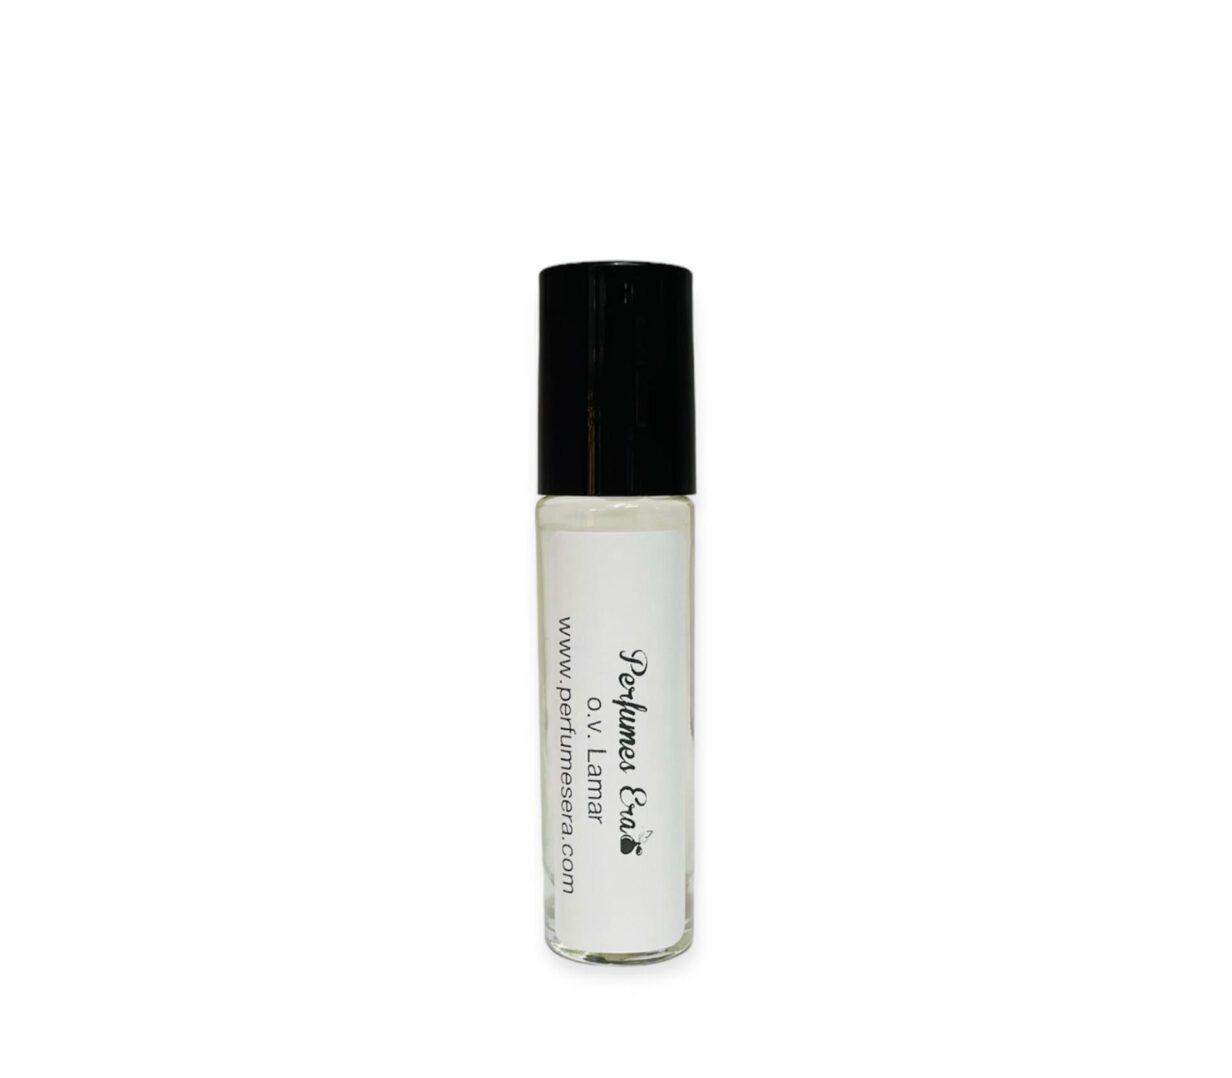 Perfumes Era roll-on bottle with label.